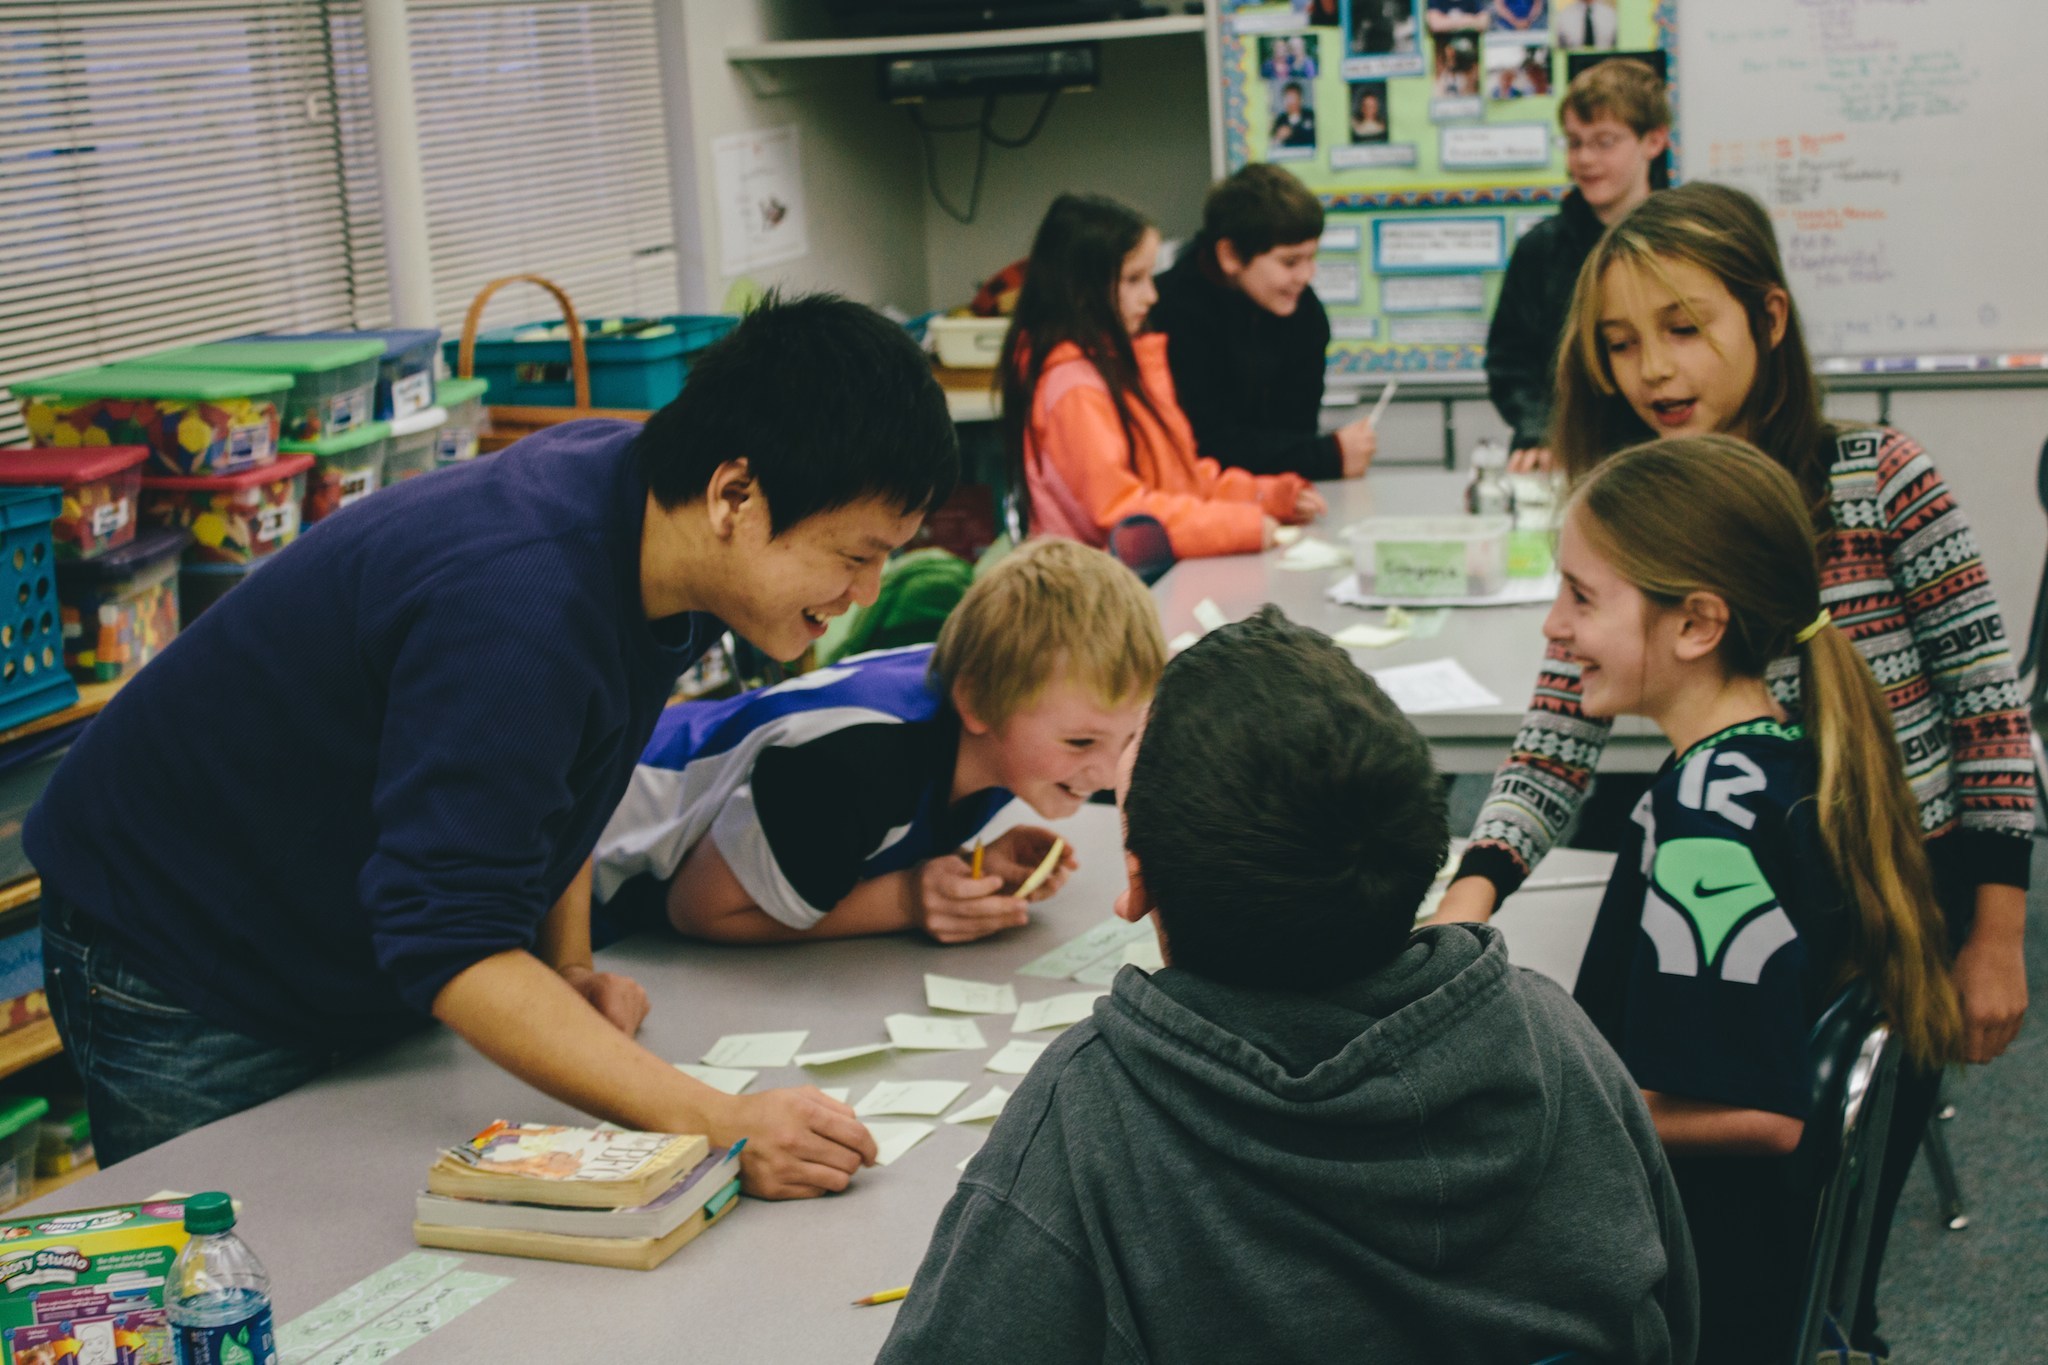 We conducted Minecraft Weather's user research by visiting a 4th-grade classroom